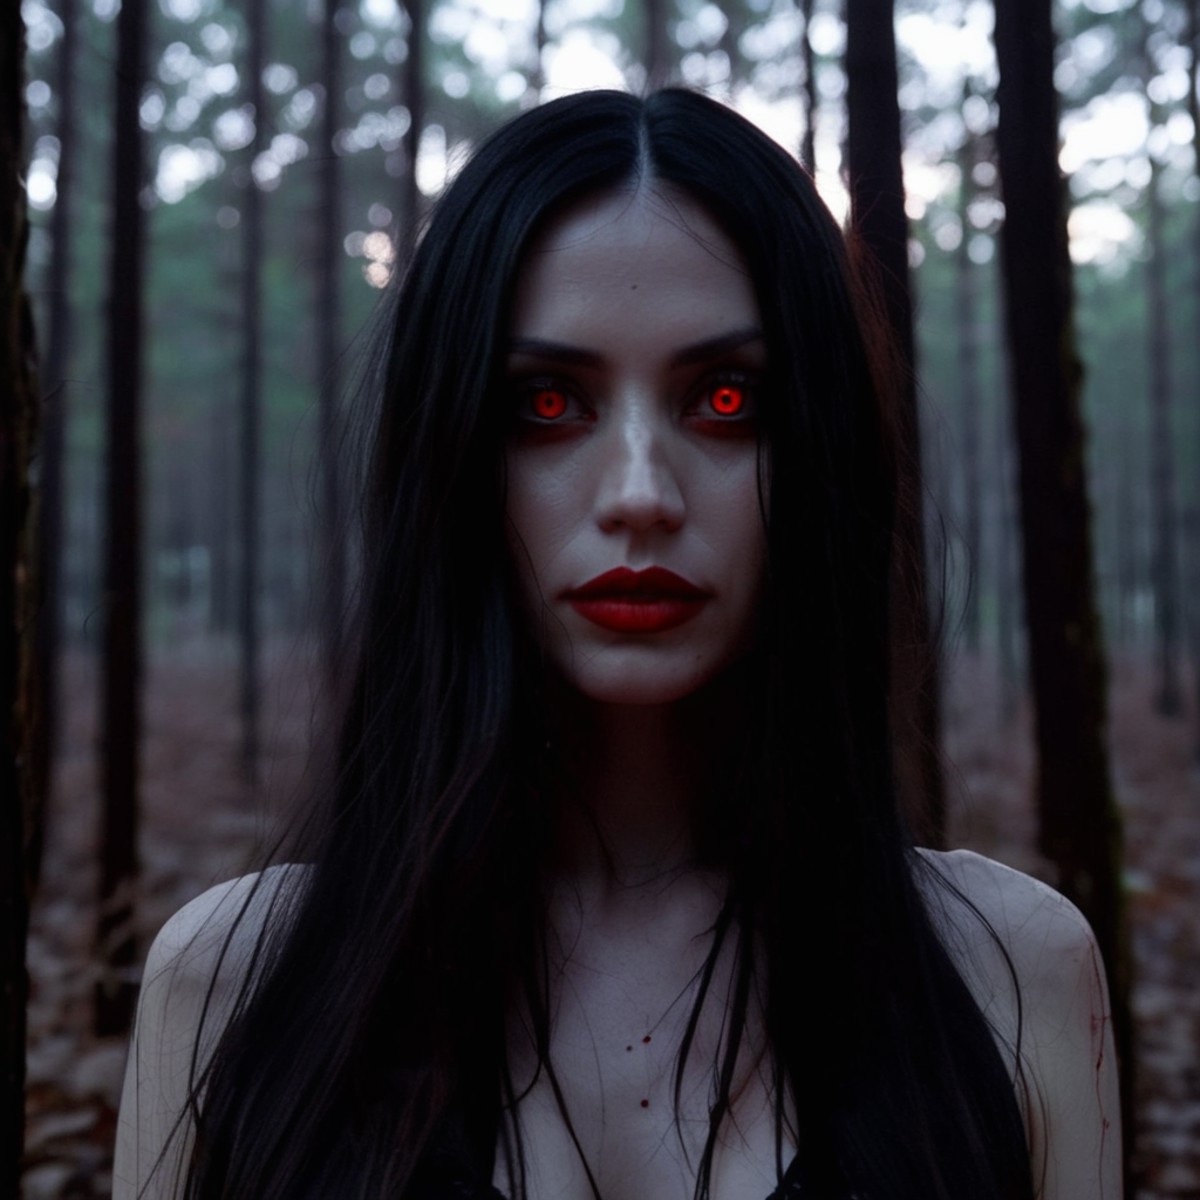 Found fottage at night, Found footage photo of a pale vampire woman with black hair and slightly glowing red eyes with lon...